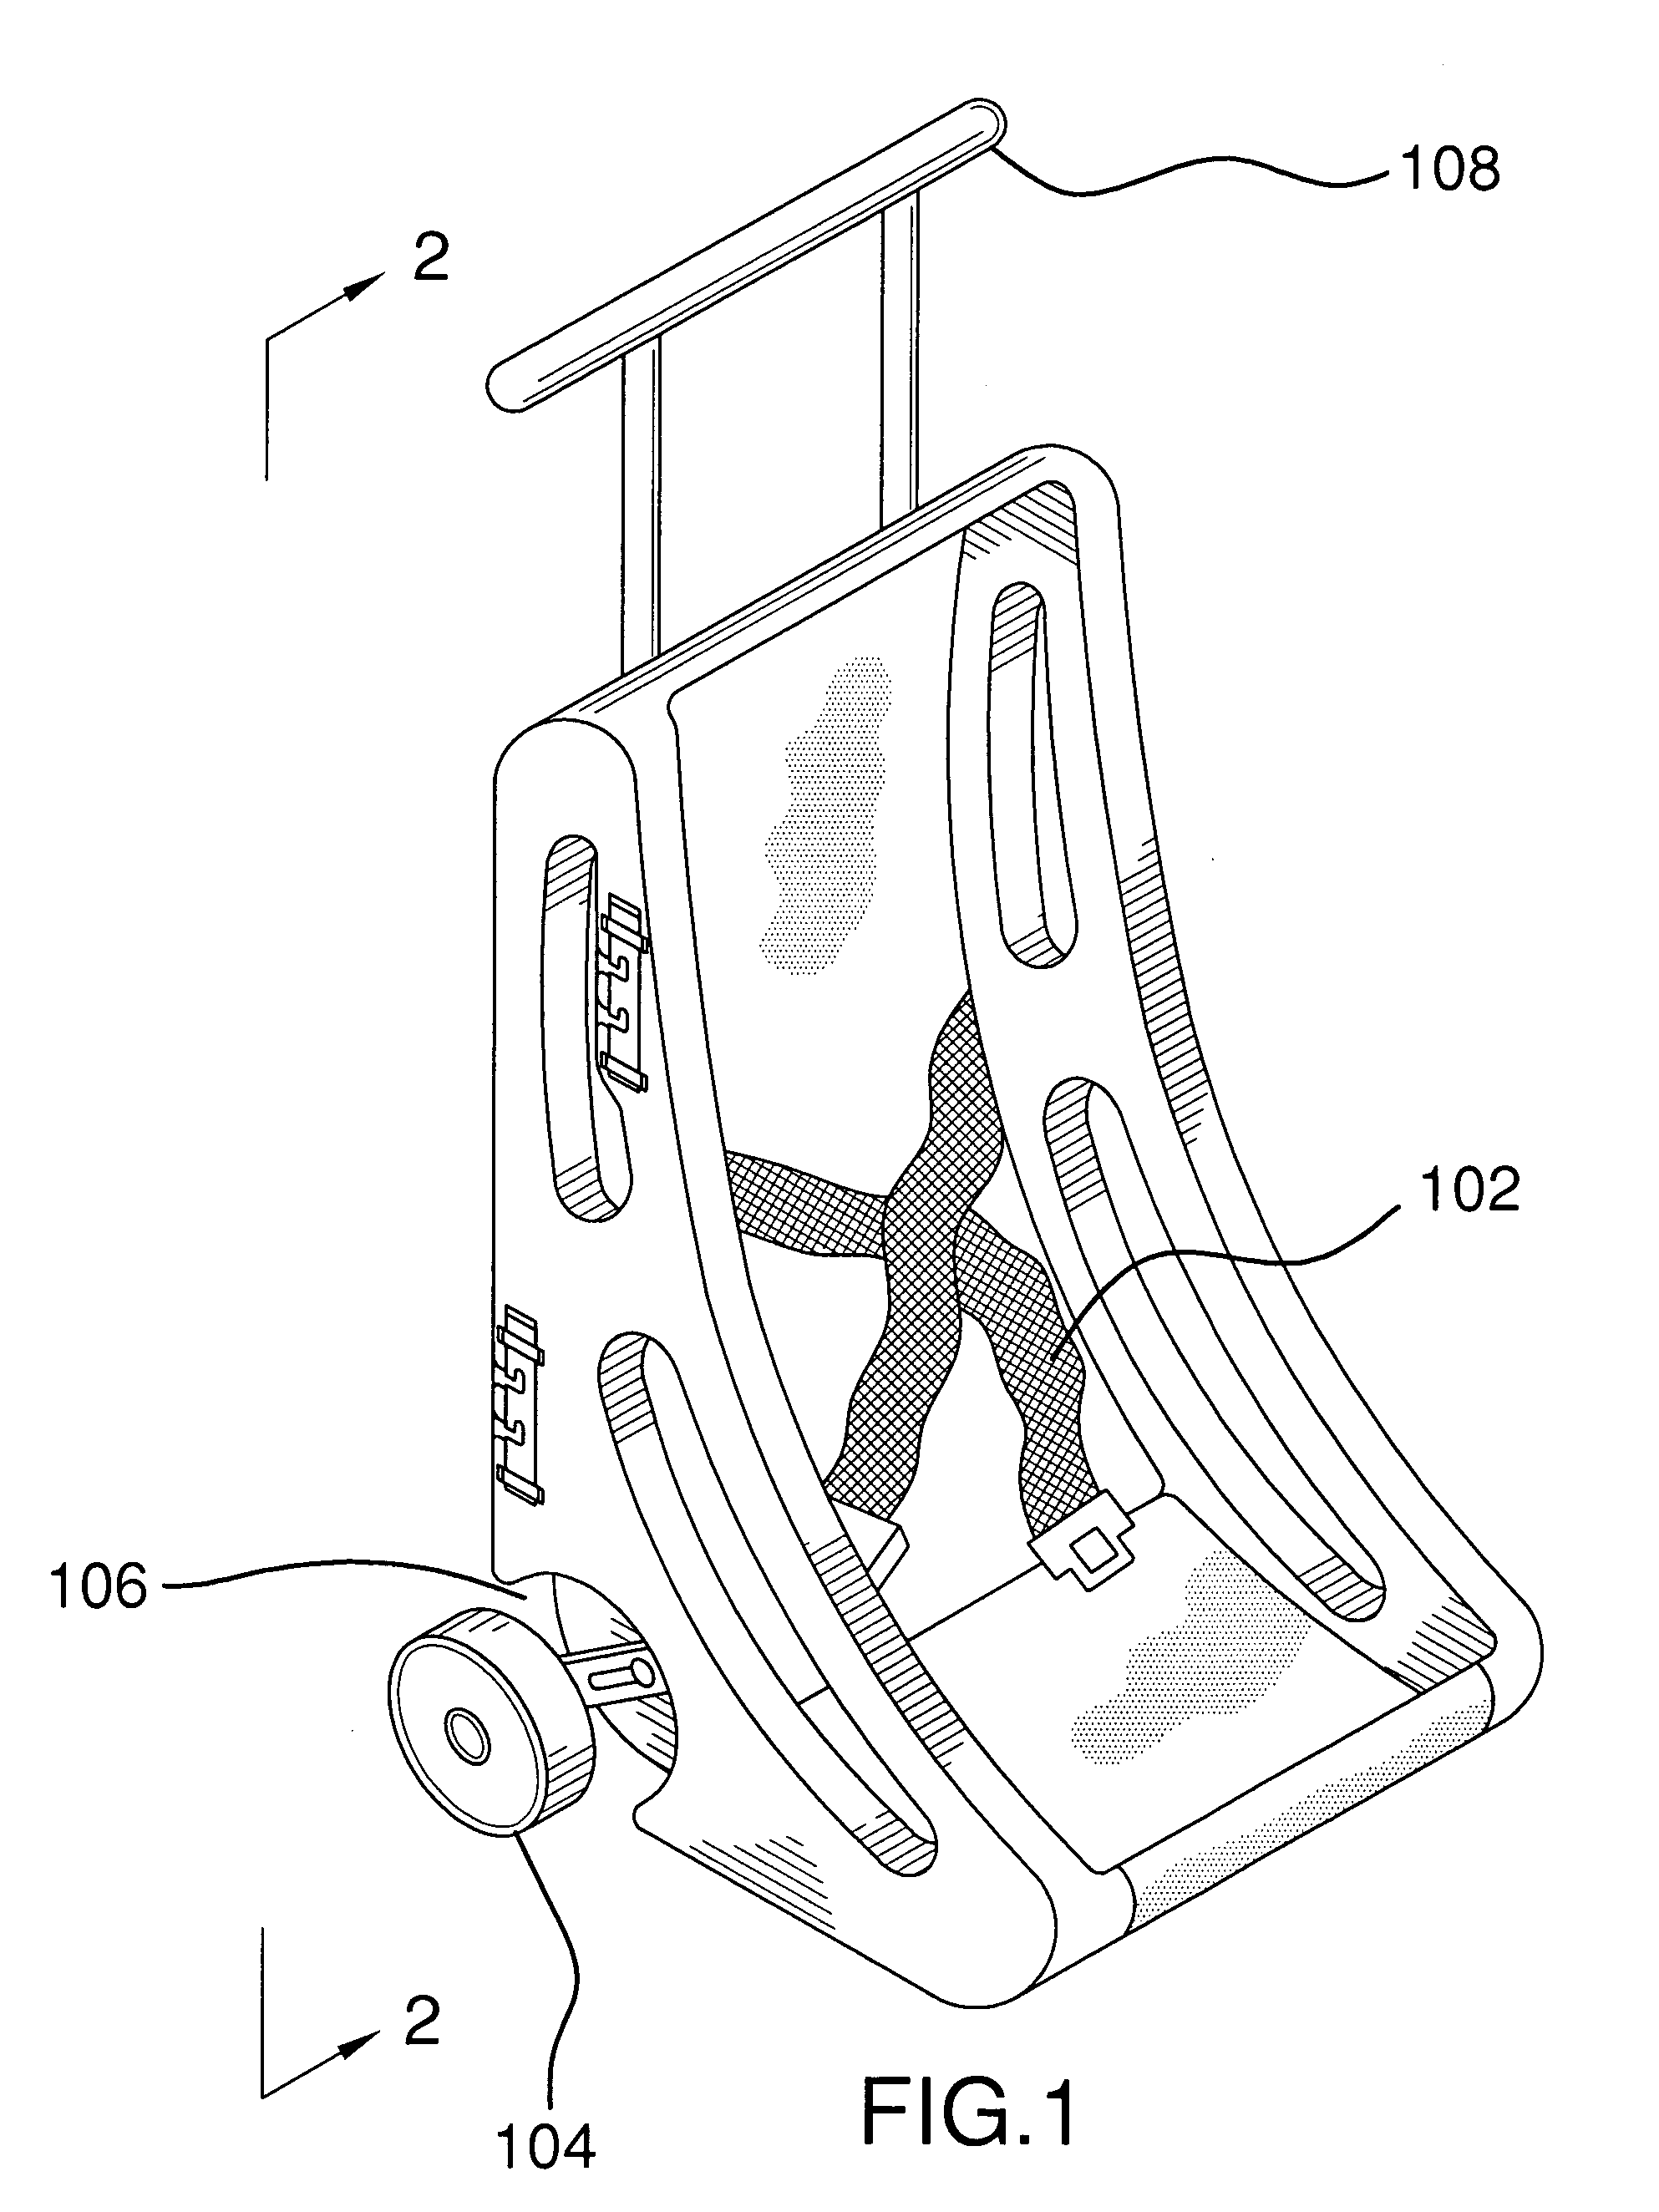 Apparatus for an integrated child restraint seat and transport for carry on luggage